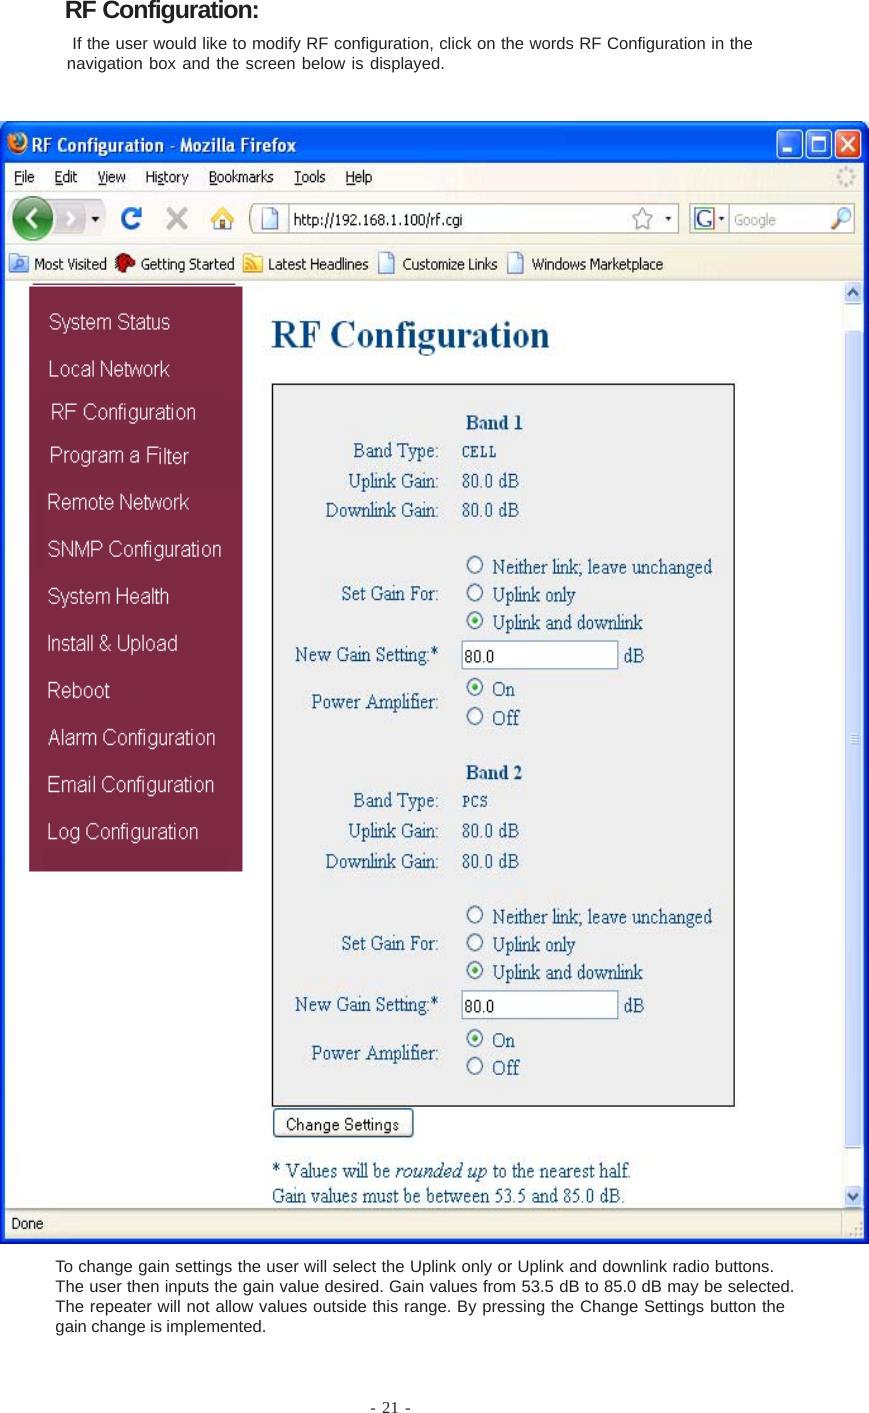 - 21 - If the user would like to modify RF configuration, click on the words RF Configuration in thenavigation box and the screen below is displayed.To change gain settings the user will select the Uplink only or Uplink and downlink radio buttons.The user then inputs the gain value desired. Gain values from 53.5 dB to 85.0 dB may be selected.The repeater will not allow values outside this range. By pressing the Change Settings button thegain change is implemented.RF Configuration: